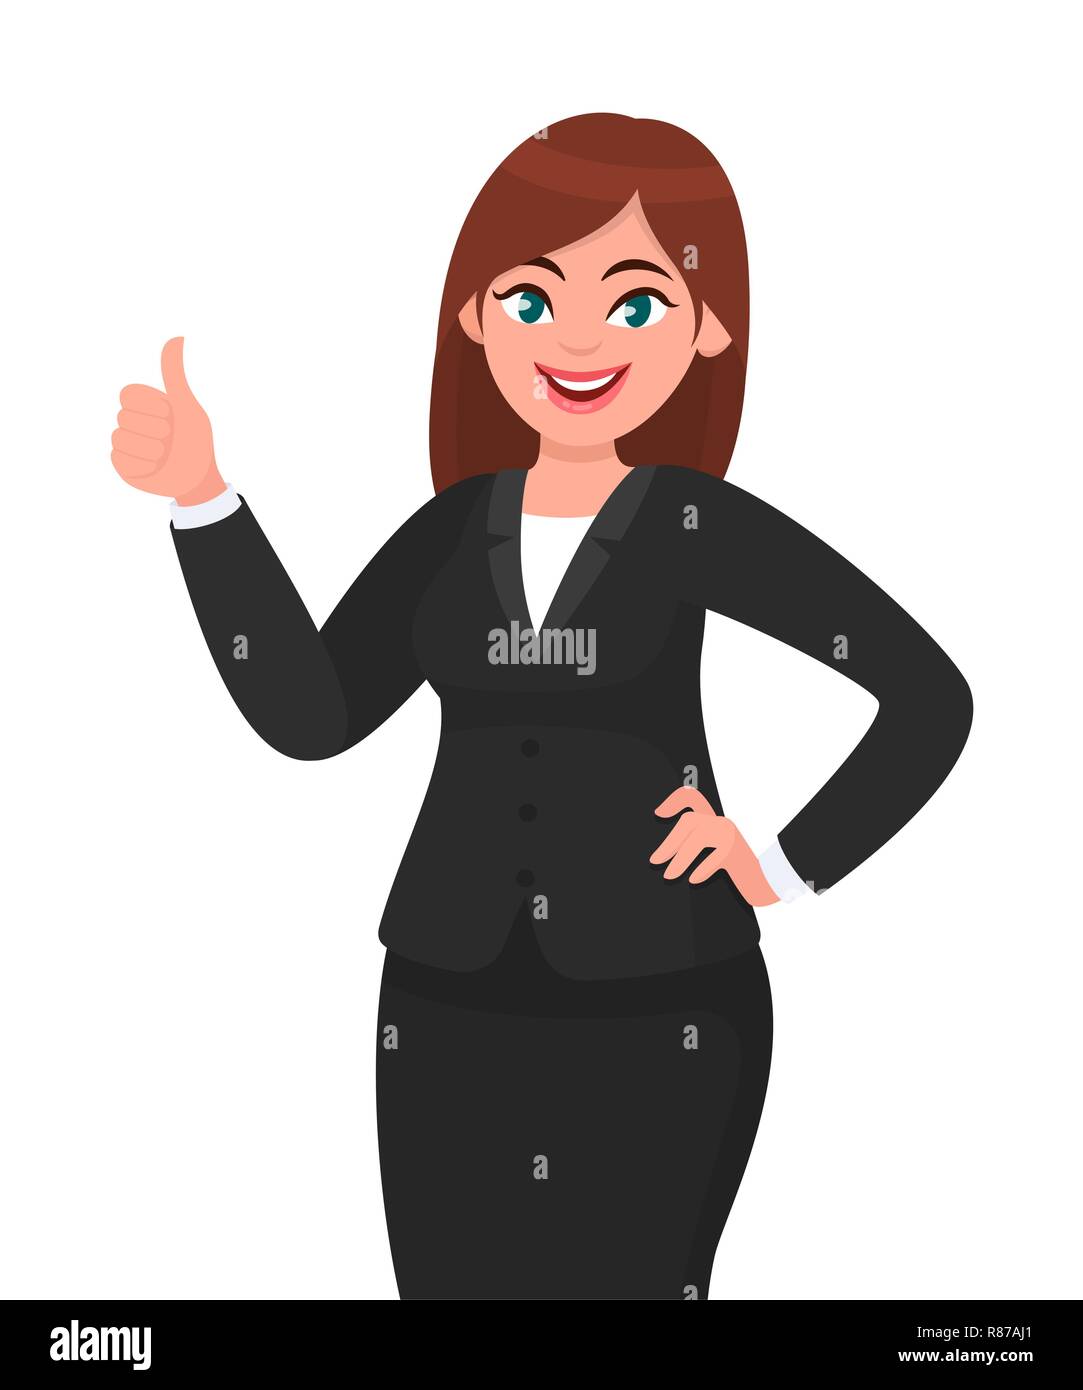 Beautiful smiling business woman showing thumbs up sign / gesture. Like, agree, approve, positive concept illustration in vector cartoon style. Stock Vector